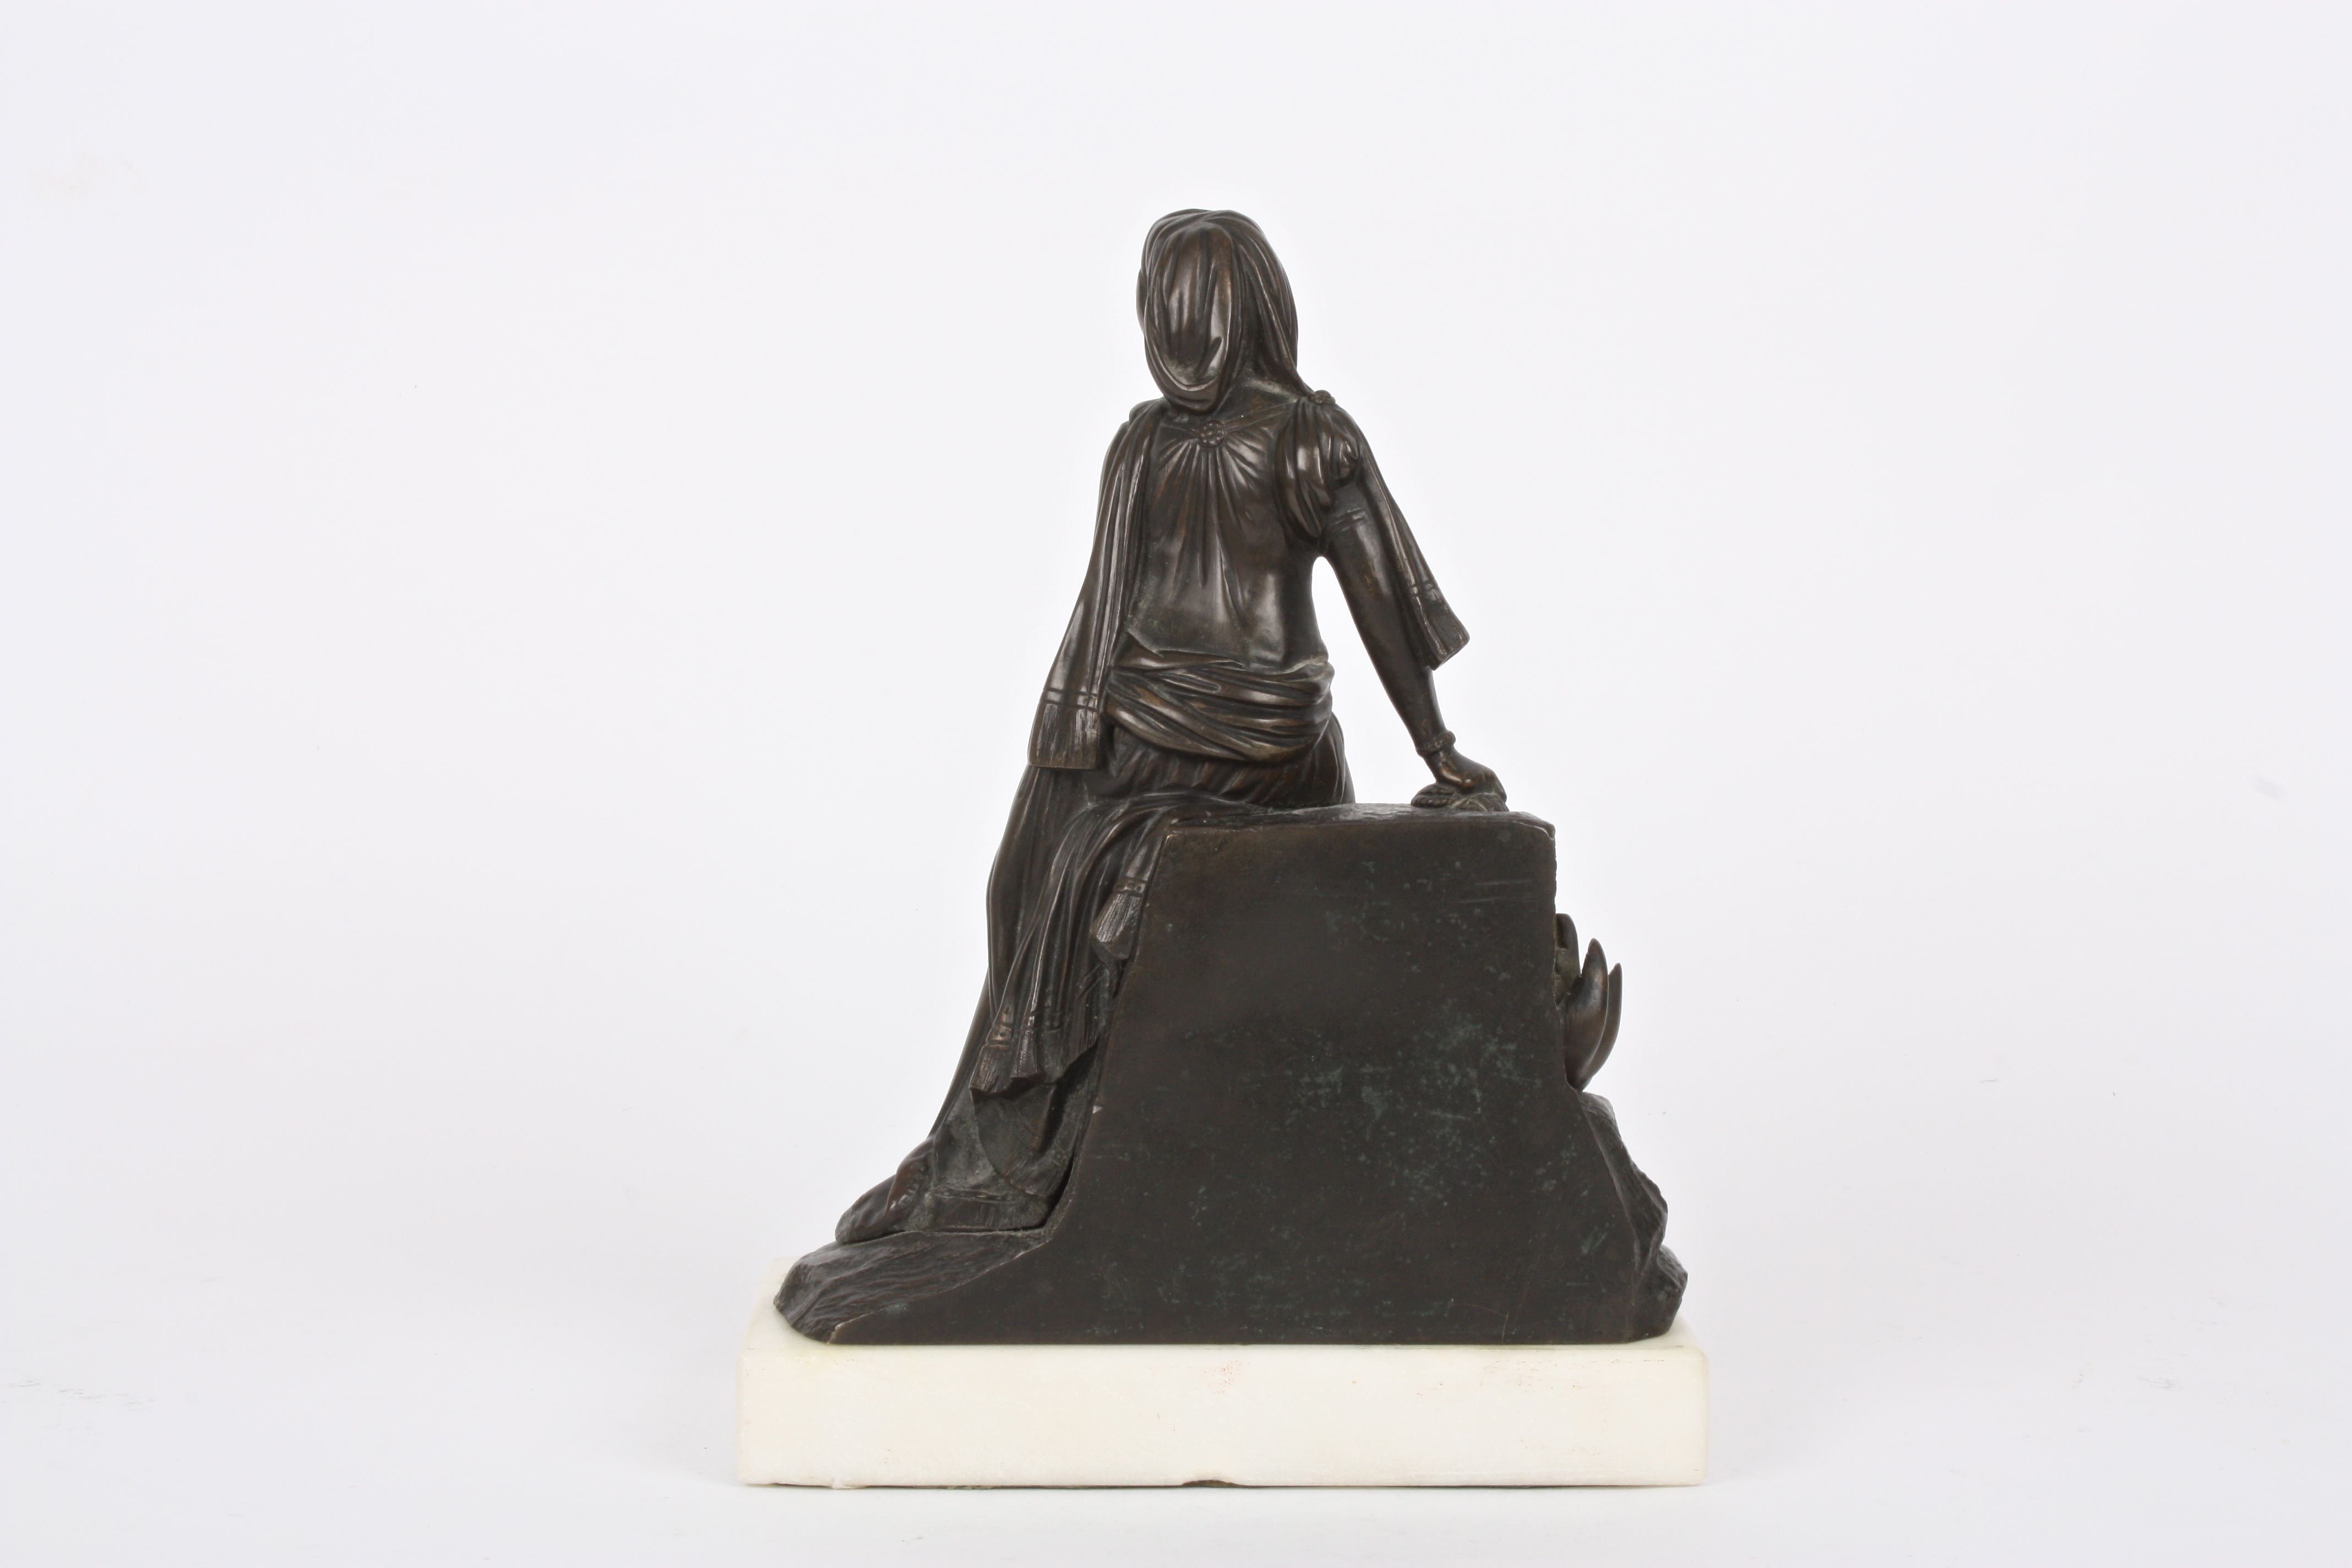 A 19th Century French bronze girl
stood wearing flowing robes stood beside a rocky pedestal and a - Image 3 of 4